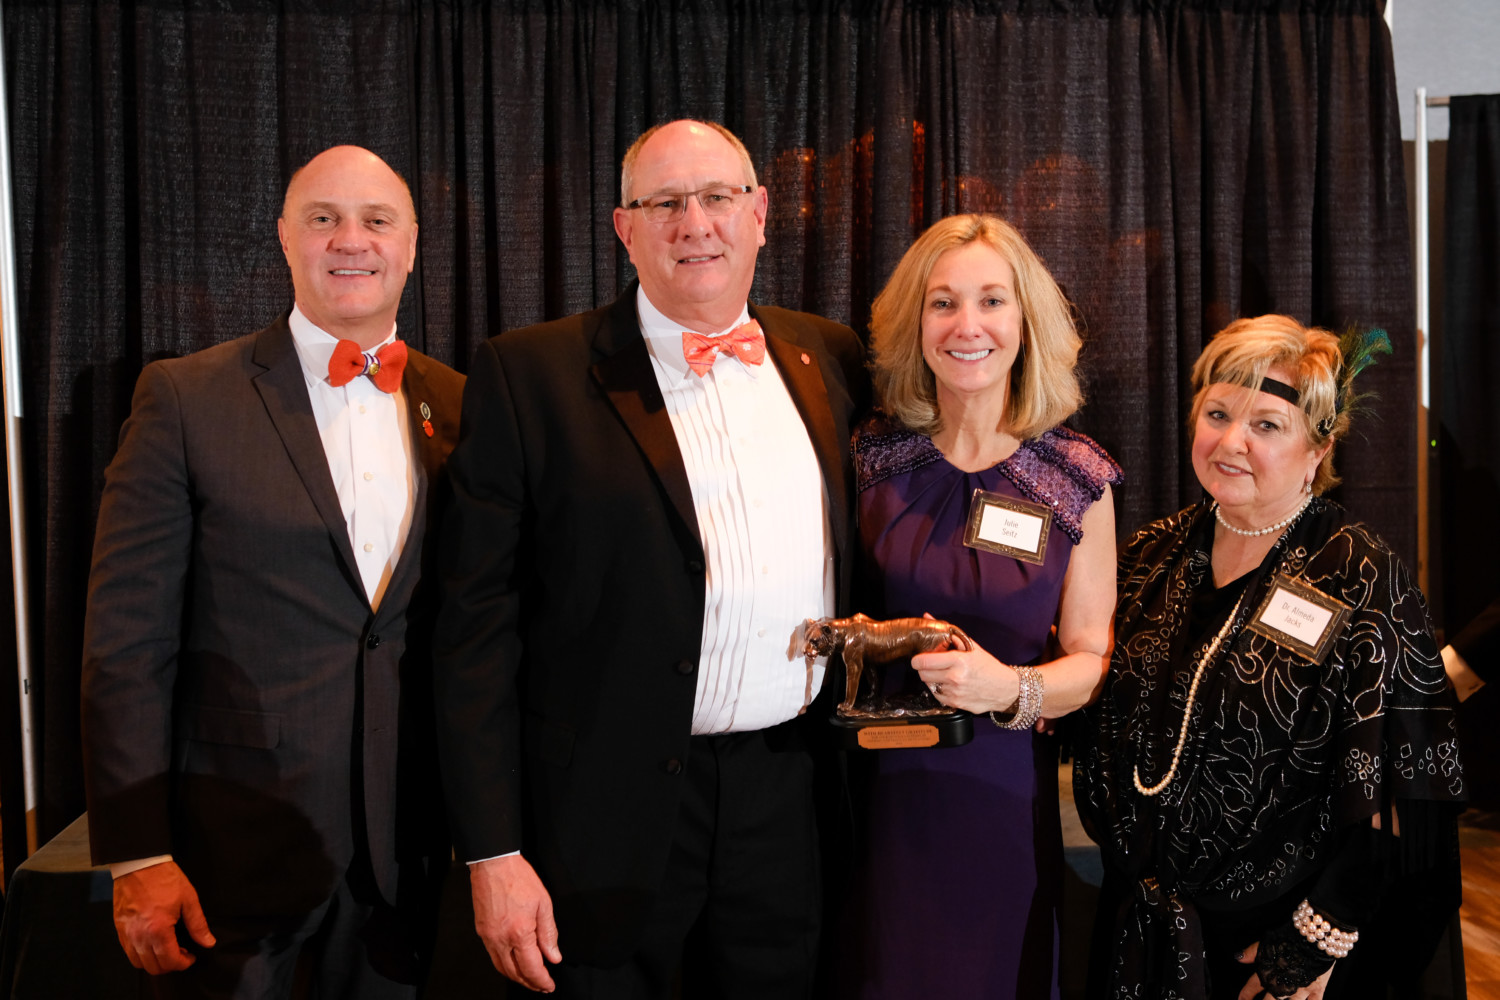 Jay and Julie Seitz receive an award as generous donors at the 2019 Student Affairs Gala from President Jim Clements (left) and Almeda Jacks (right).